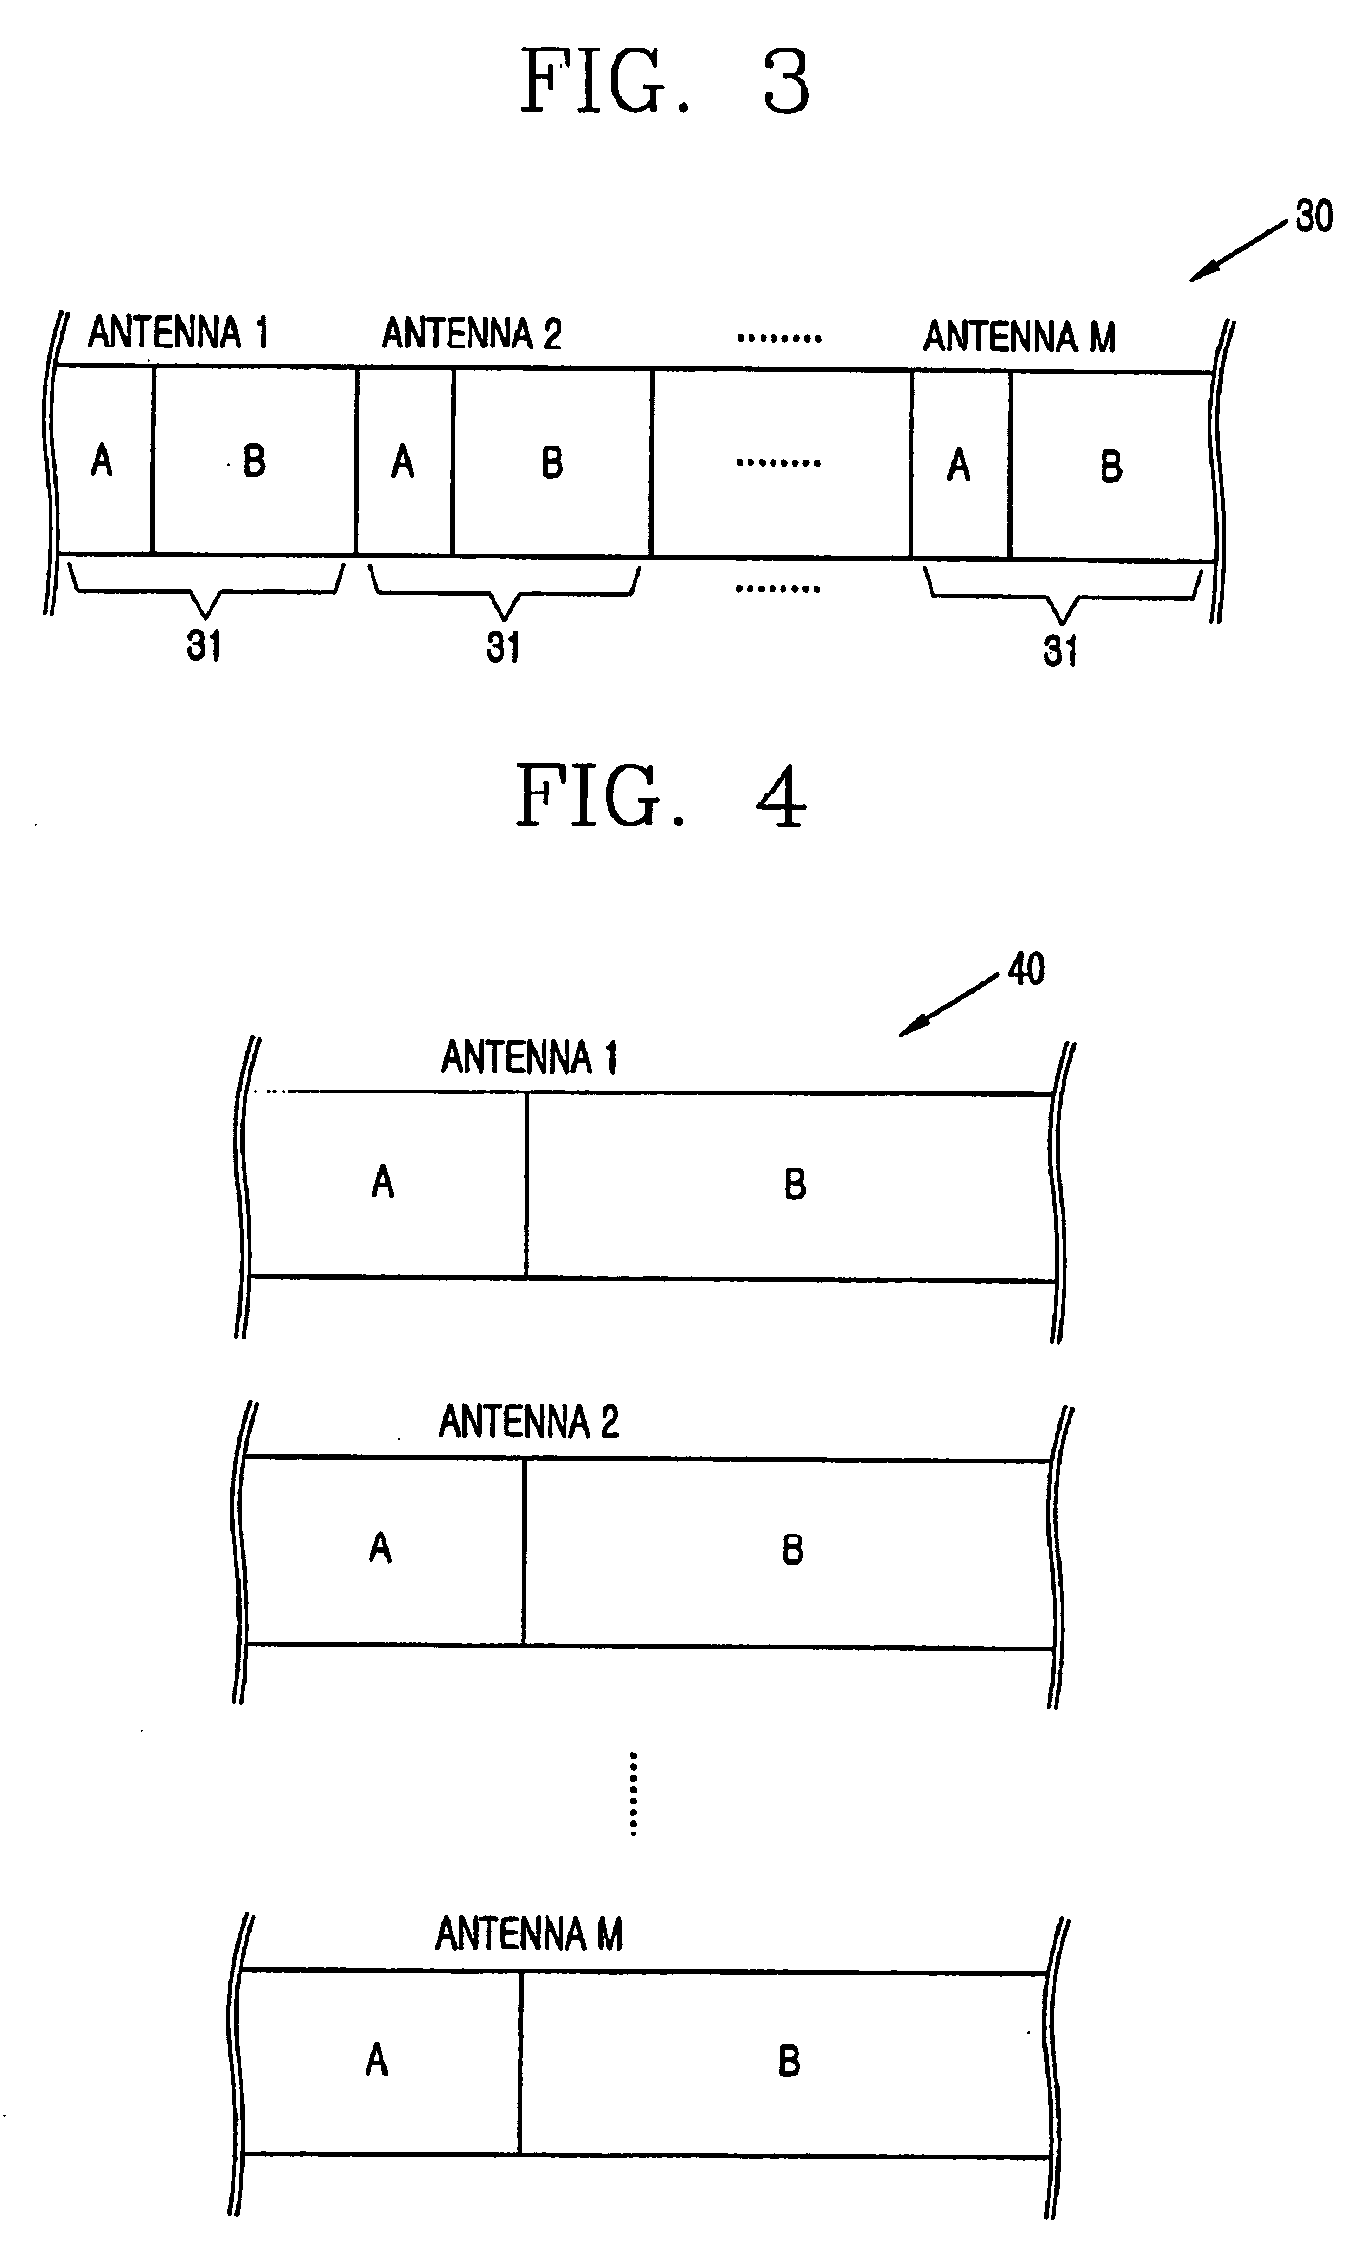 Transmission method for downlink control signal in MIMO system